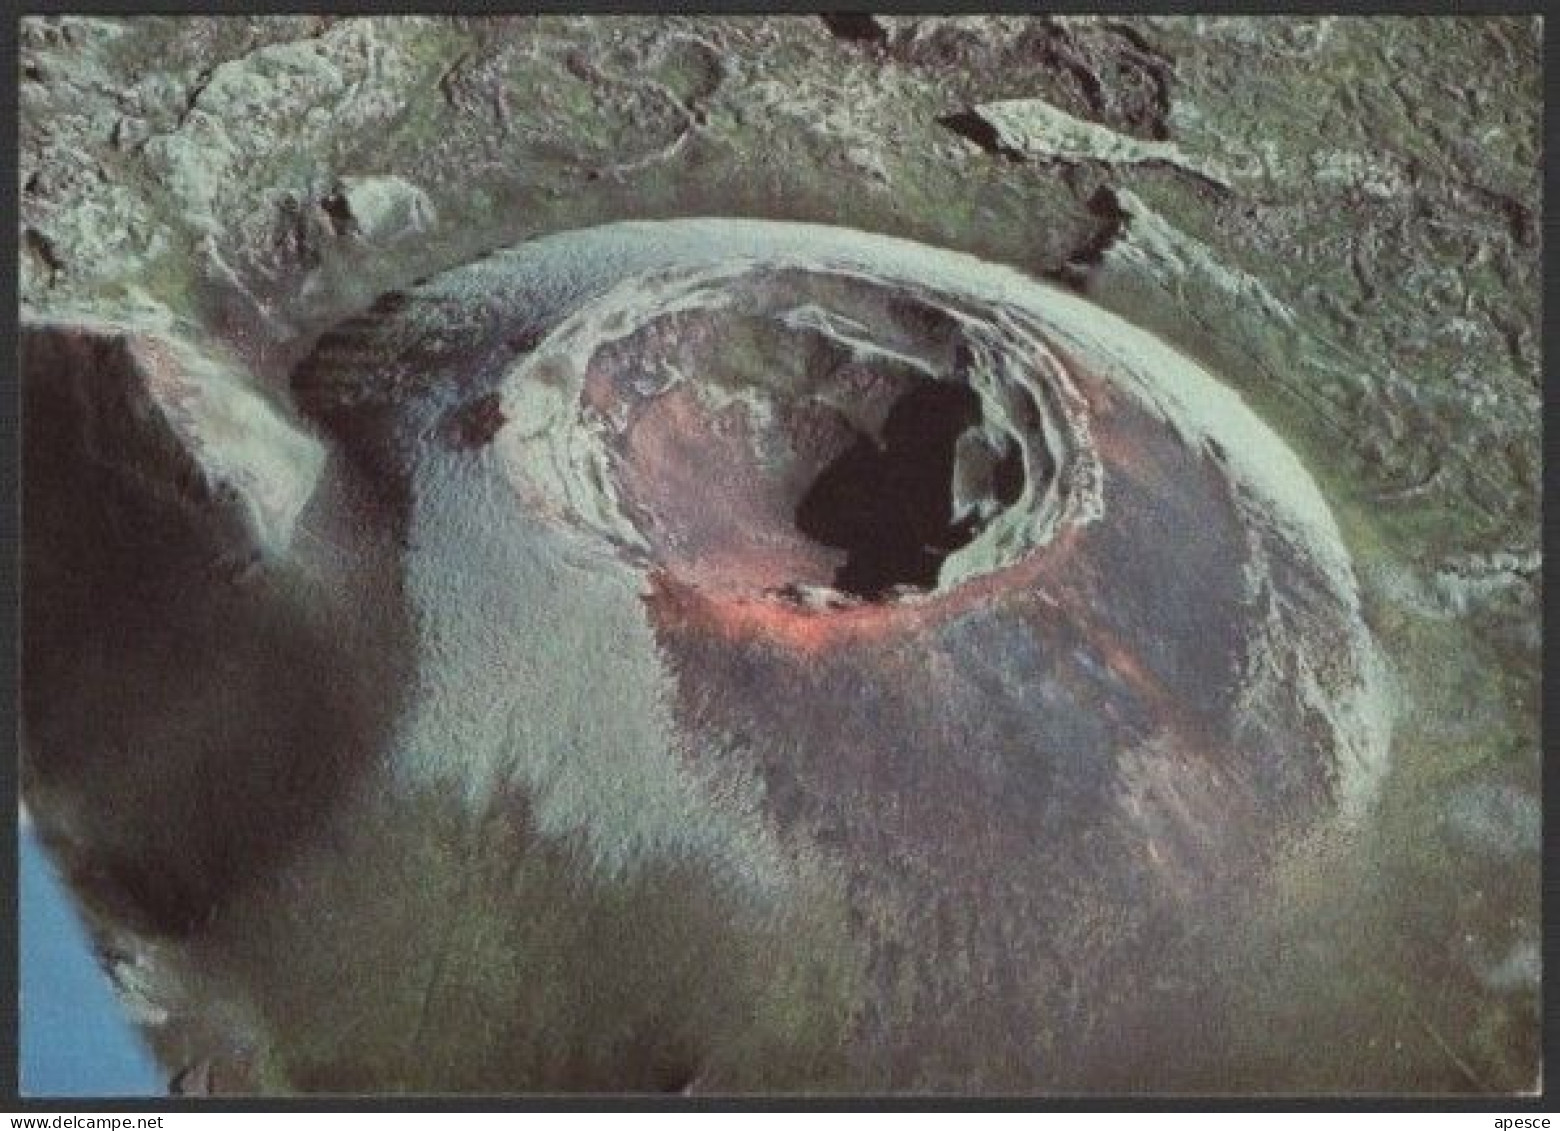 ICELAND - ONE OF THE 115 CRATERS OF THE INFAMOUS LAKI FISSURE ERUPTION 1783 - MINT - I - Islanda